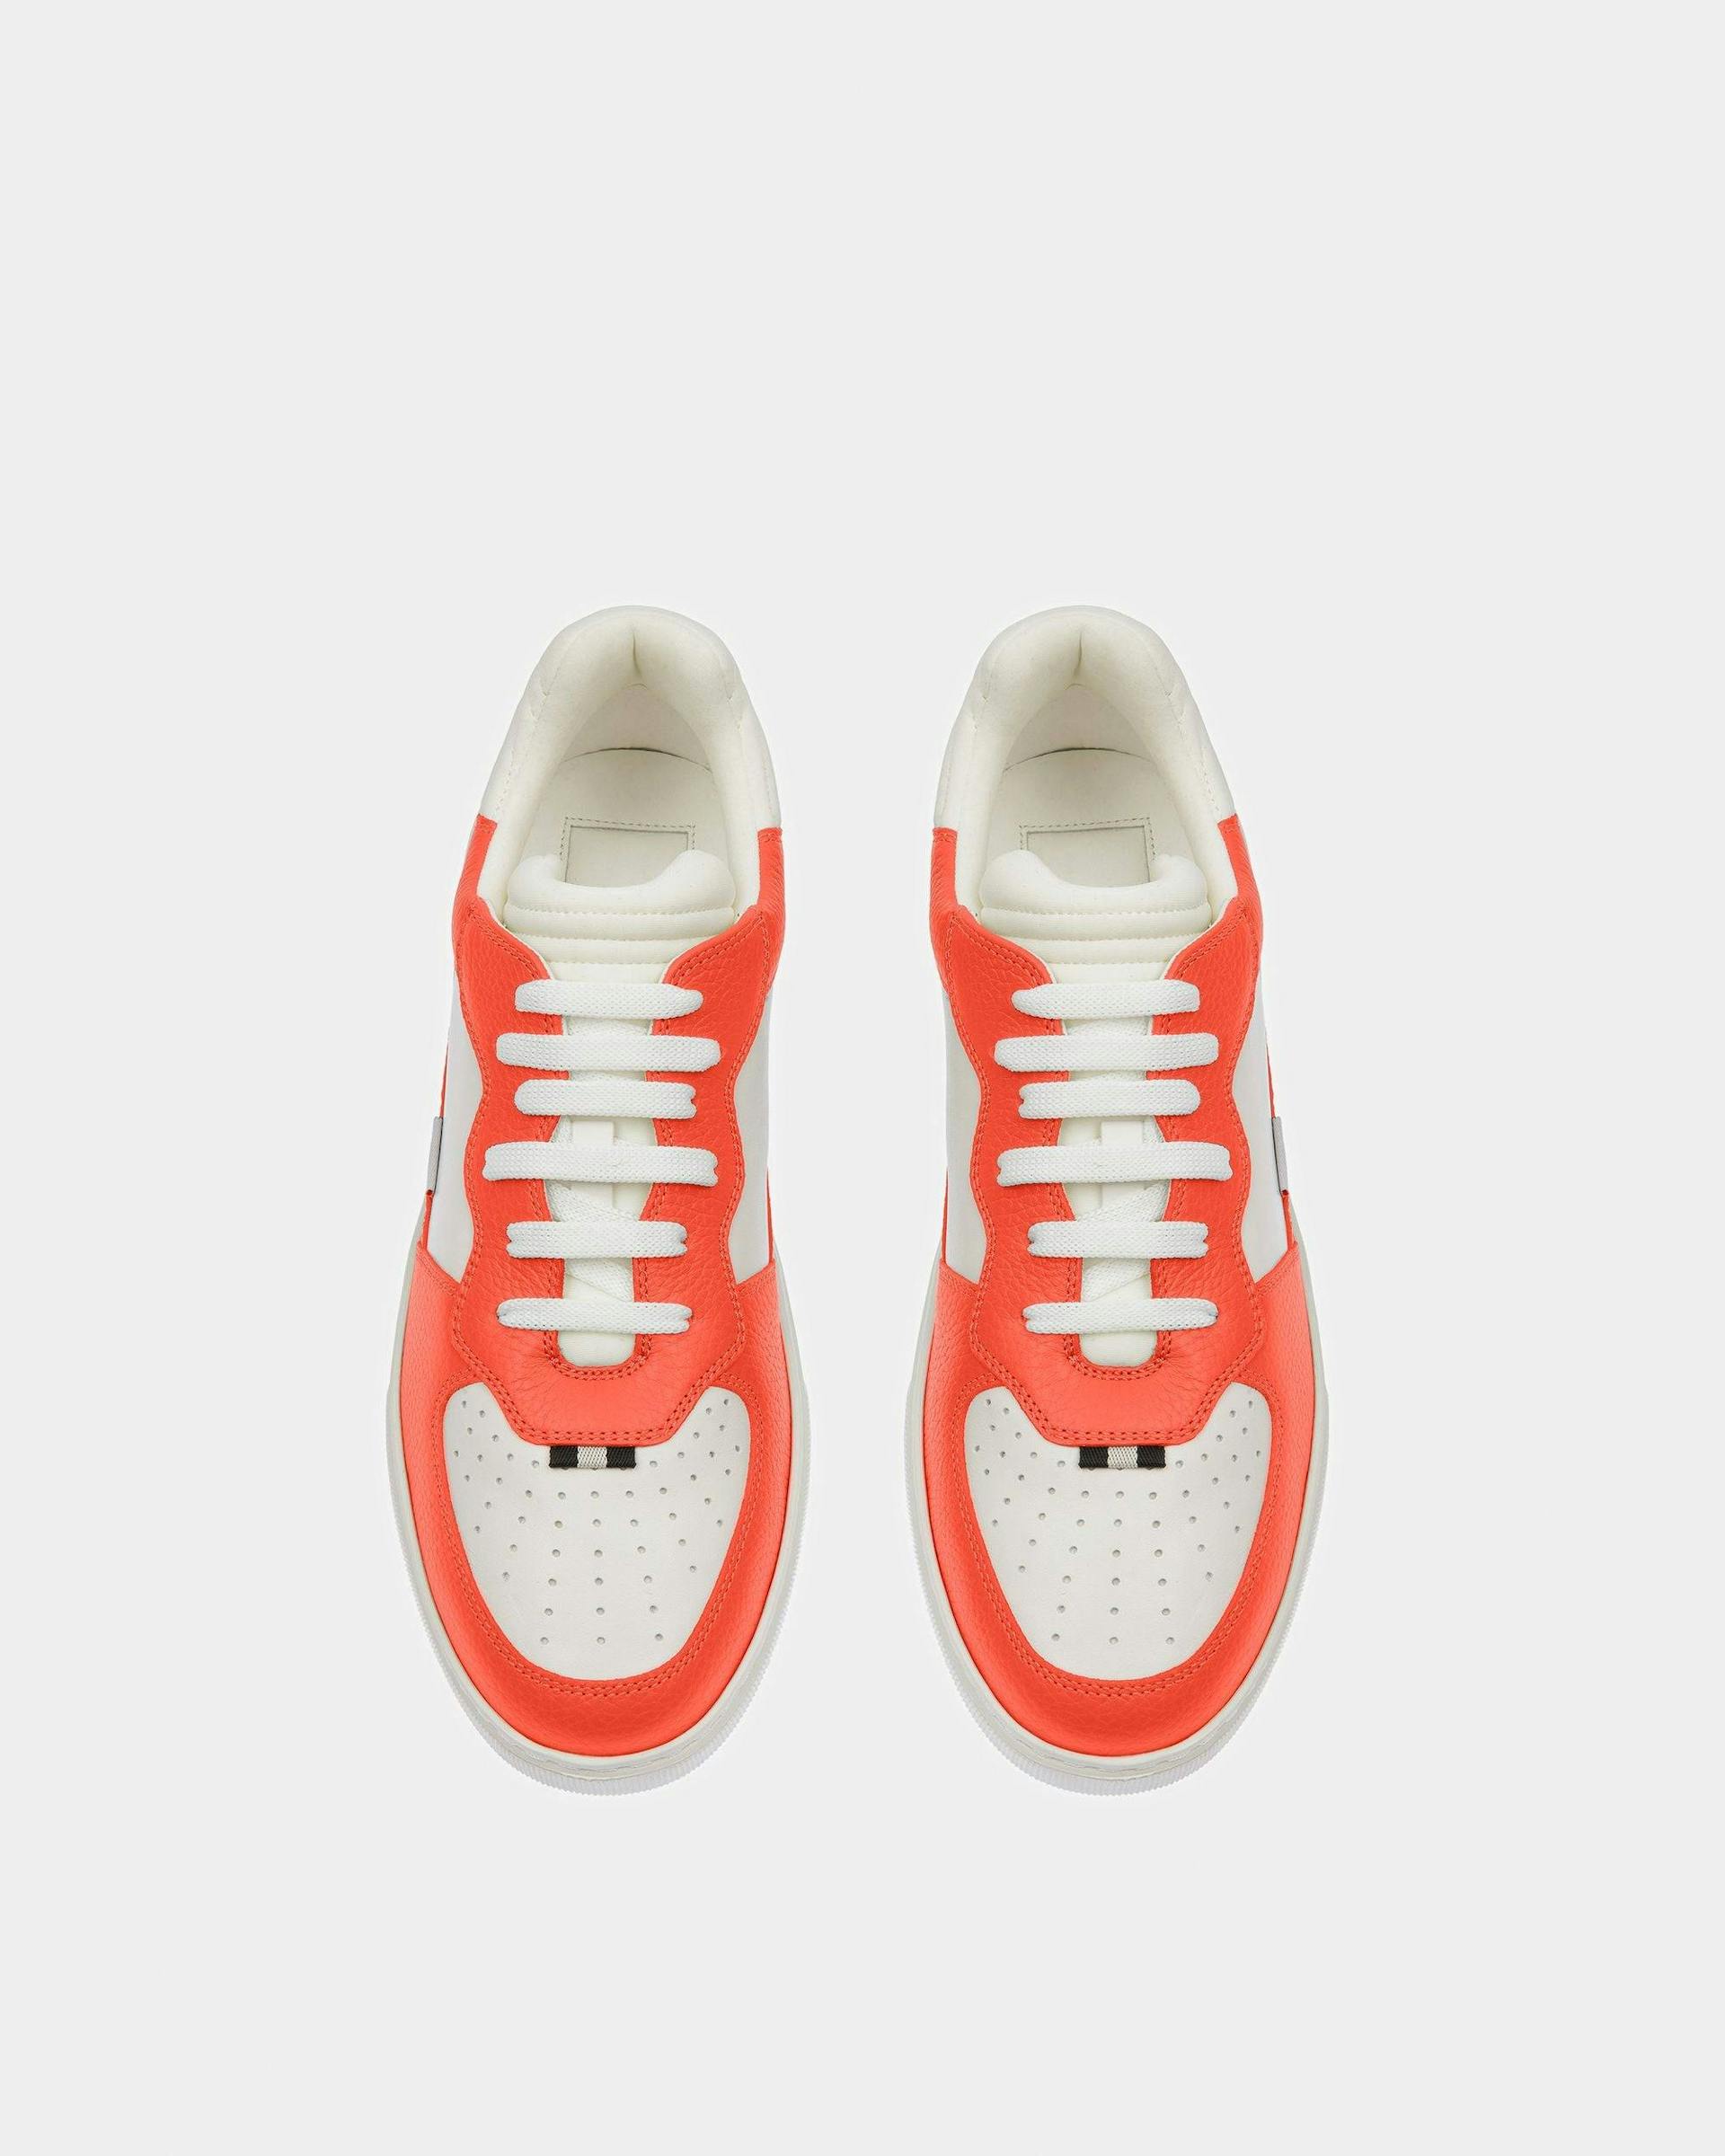 Mark Leather Sneakers In Orange And White - Men's - Bally - 02